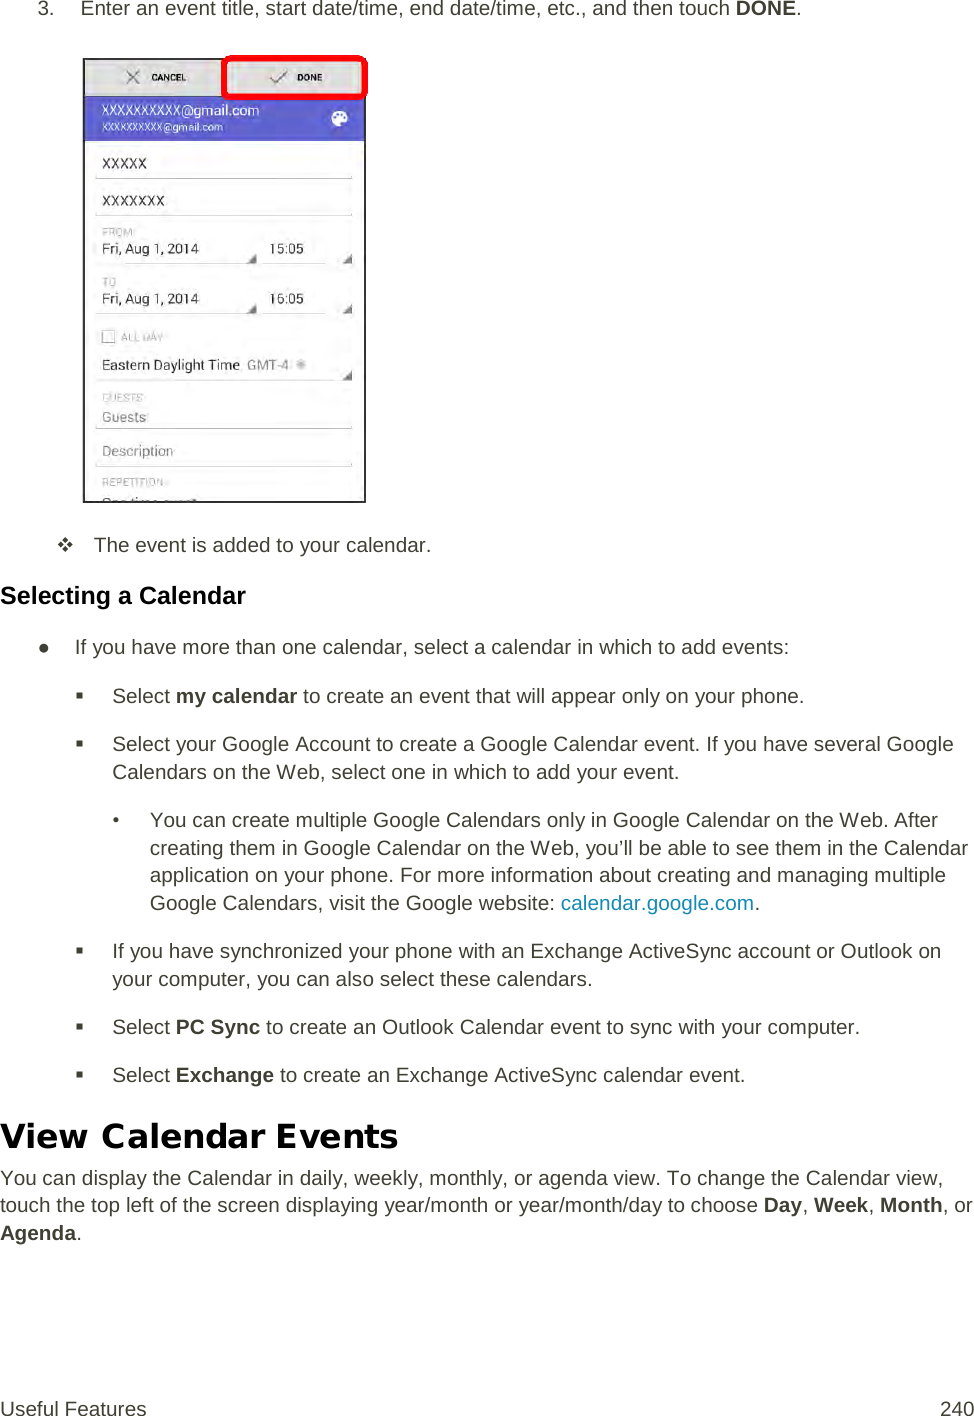 3.   Enter an event title, start date/time, end date/time, etc., and then touch DONE.    The event is added to your calendar. Selecting a Calendar ● If you have more than one calendar, select a calendar in which to add events:  Select my calendar to create an event that will appear only on your phone.  Select your Google Account to create a Google Calendar event. If you have several Google Calendars on the Web, select one in which to add your event. • You can create multiple Google Calendars only in Google Calendar on the Web. After creating them in Google Calendar on the Web, you’ll be able to see them in the Calendar application on your phone. For more information about creating and managing multiple Google Calendars, visit the Google website: calendar.google.com.  If you have synchronized your phone with an Exchange ActiveSync account or Outlook on your computer, you can also select these calendars.   Select PC Sync to create an Outlook Calendar event to sync with your computer.  Select Exchange to create an Exchange ActiveSync calendar event. View Calendar Events You can display the Calendar in daily, weekly, monthly, or agenda view. To change the Calendar view, touch the top left of the screen displaying year/month or year/month/day to choose Day, Week, Month, or Agenda. Useful Features 240   